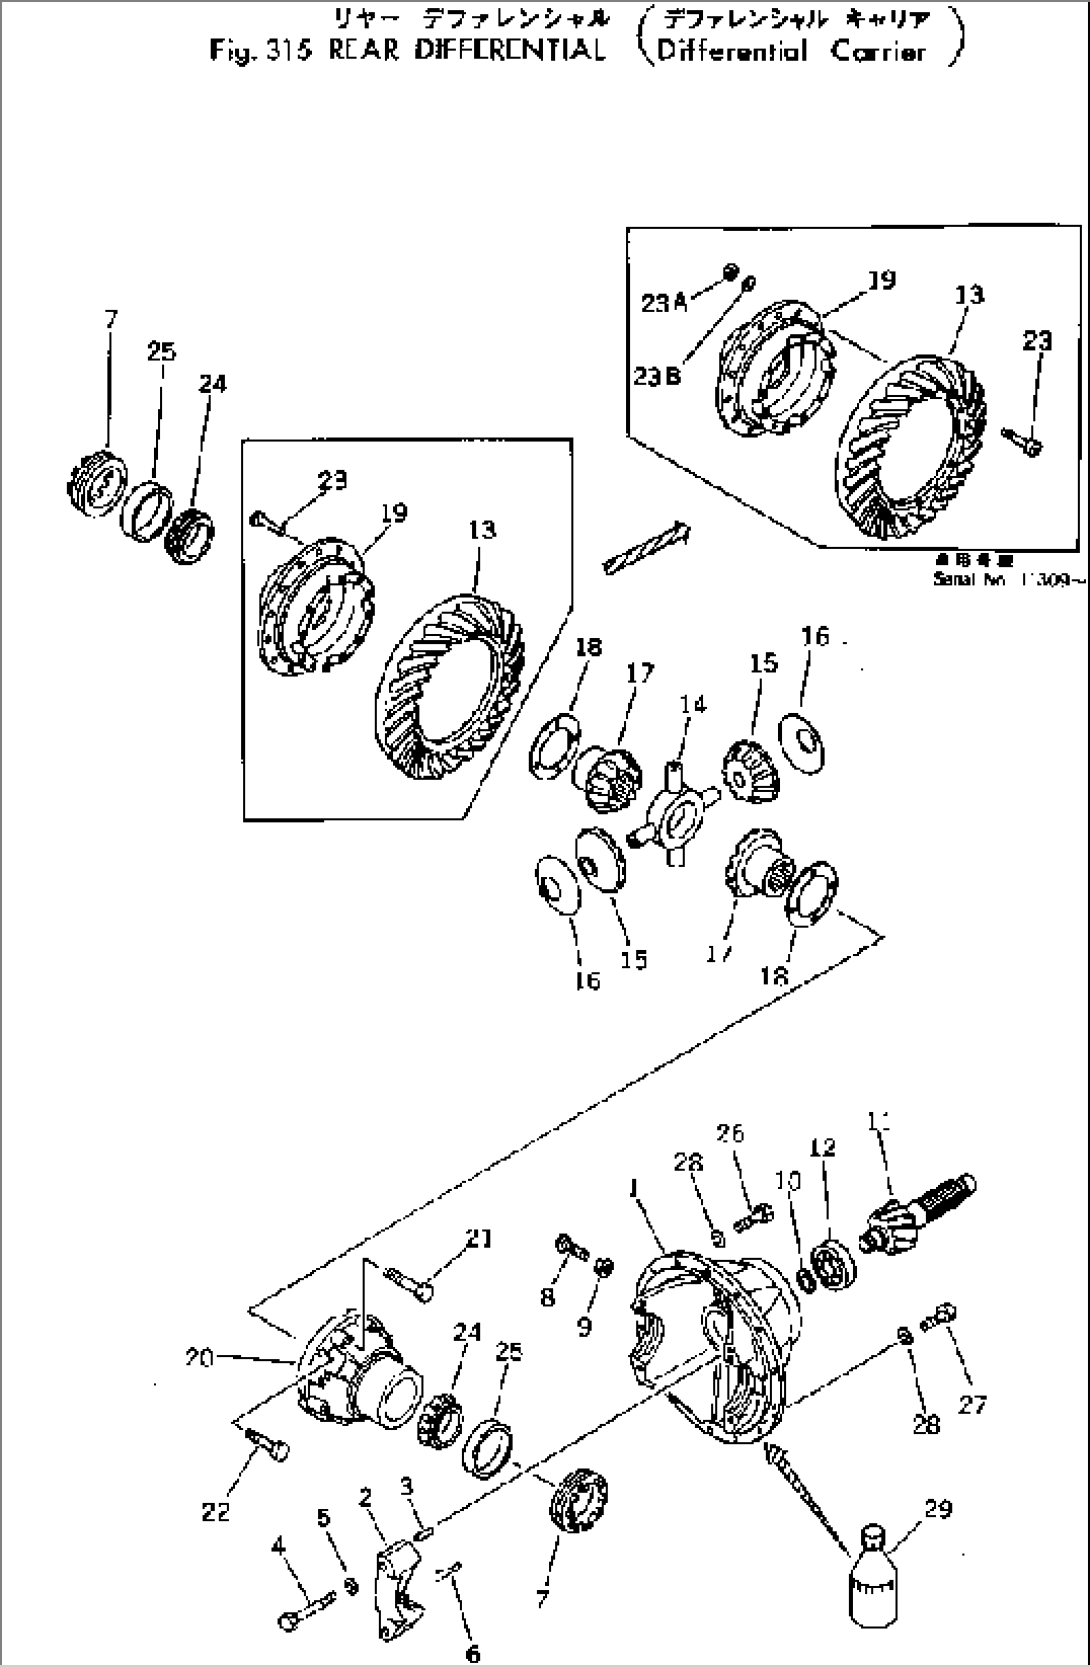 REAR DIFFERENTIAL (DIFFERENTIAL CARRIER)(#10001-)